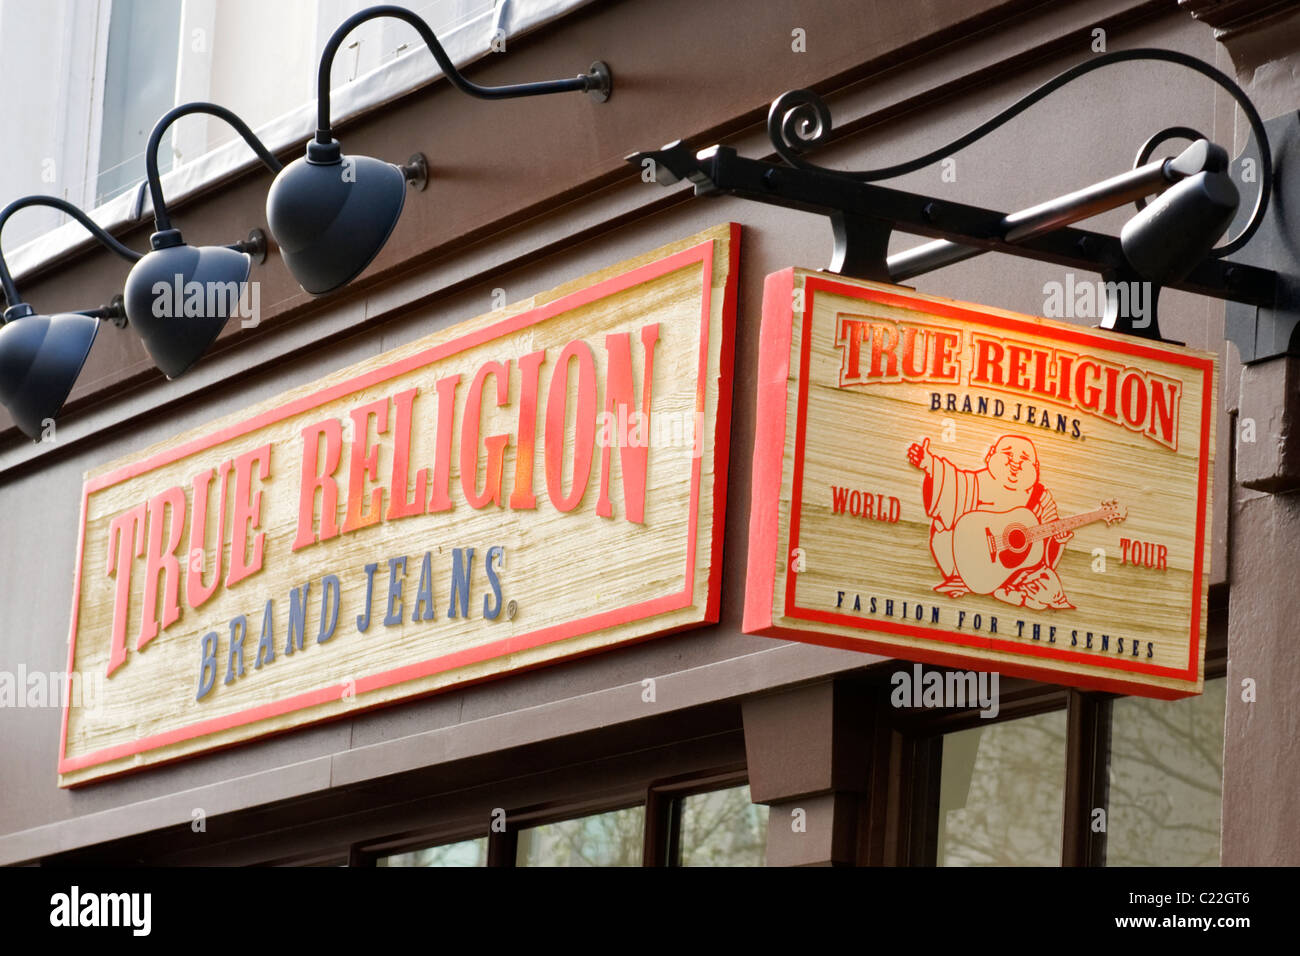 Covent Gardens , True Religion brand jeans shop or store signs - Fashion for the senses Stock Photo